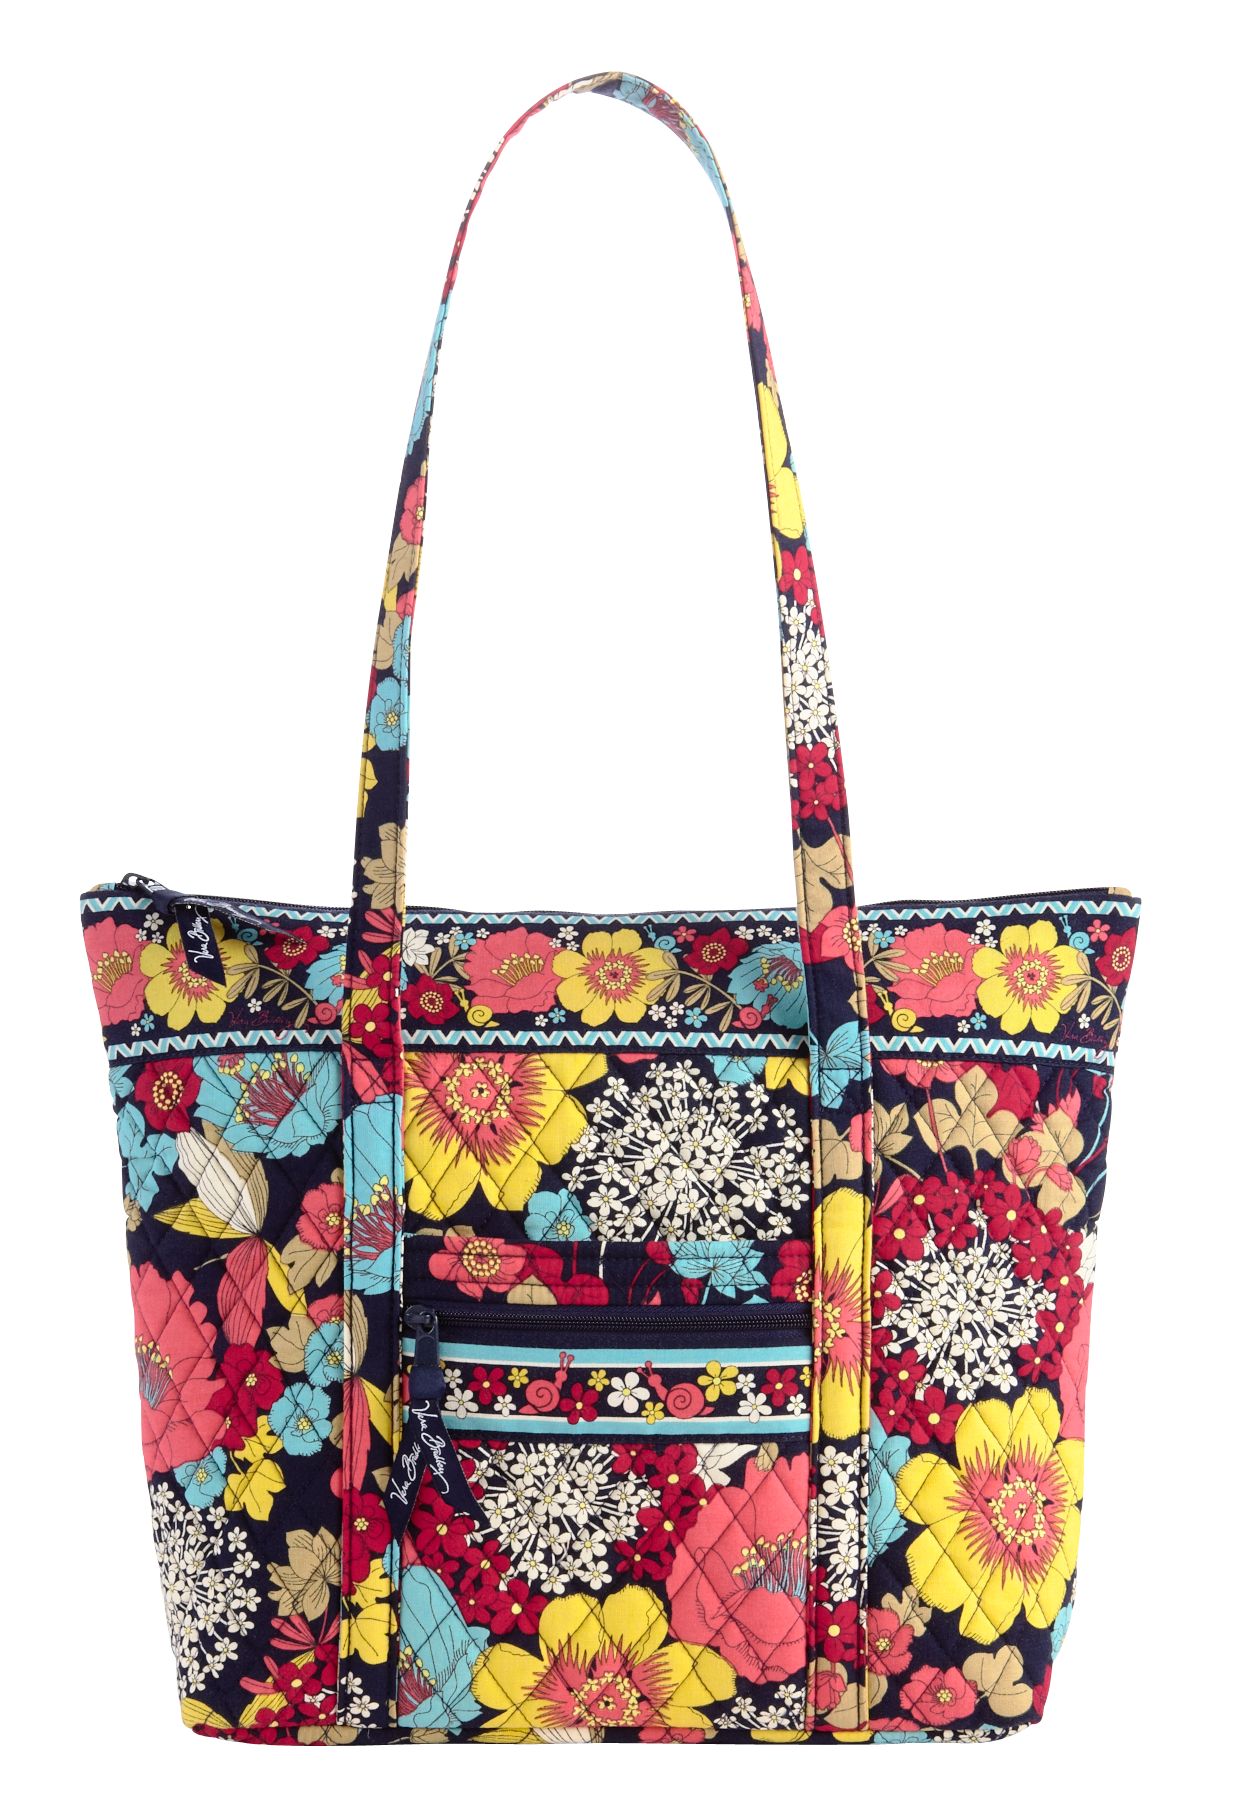 SydRules talks fashion and life!: Fabulous bags by Vera Bradley